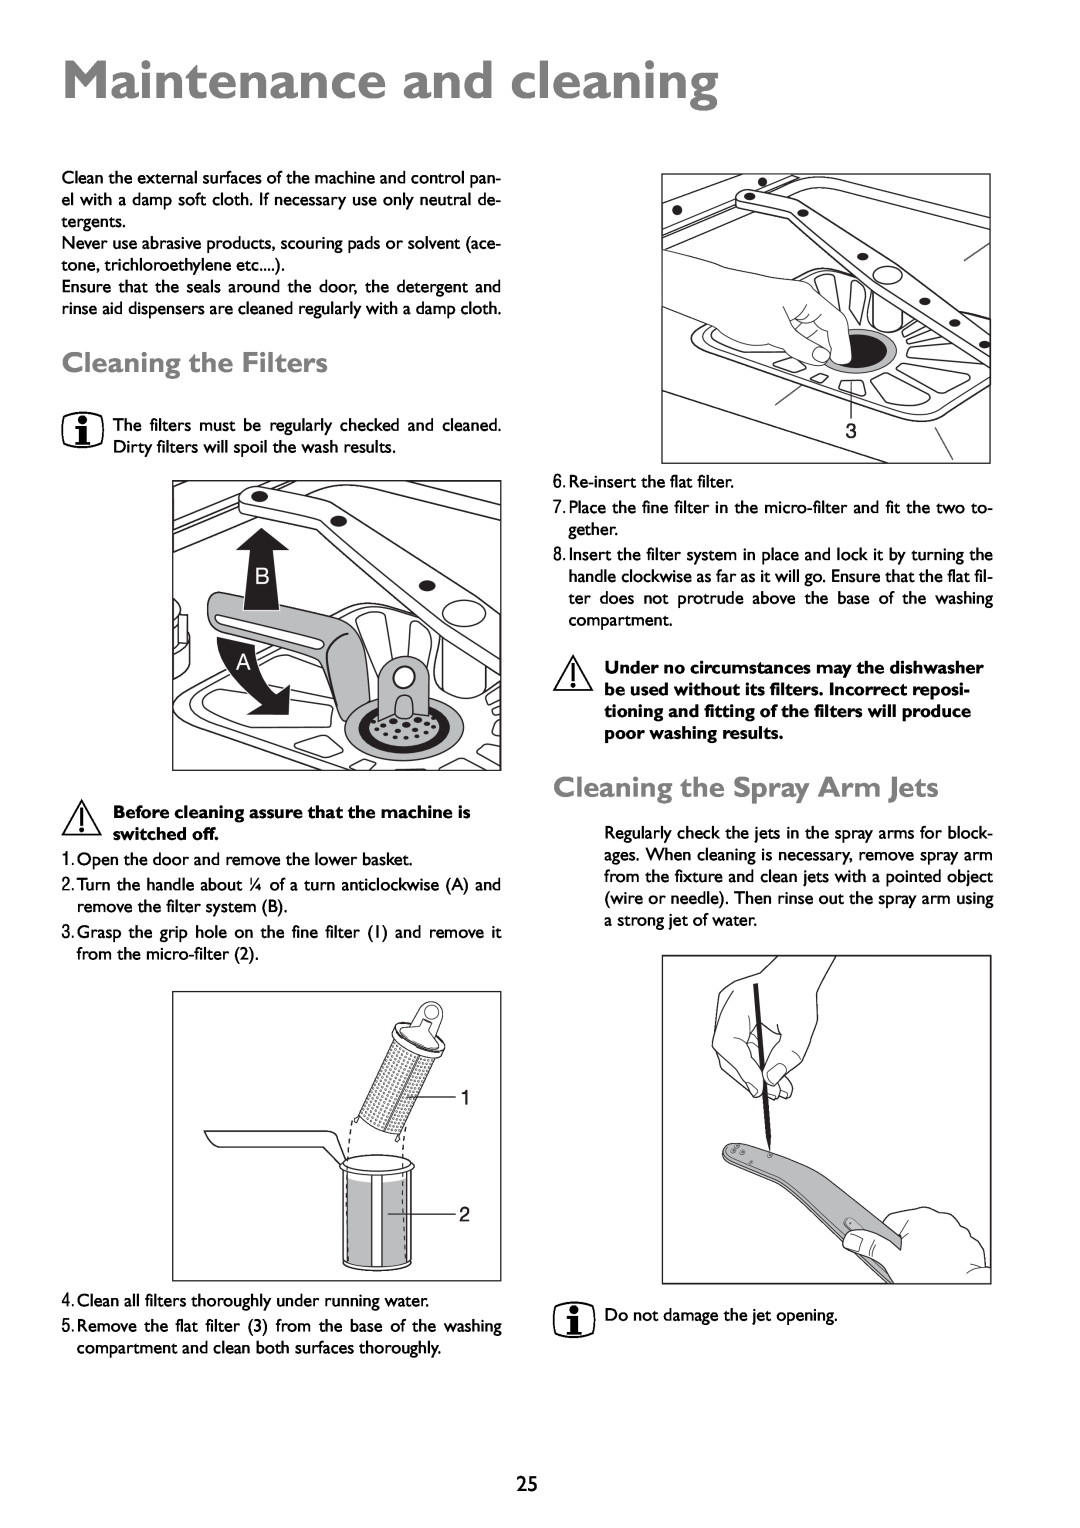 John Lewis JLDWW 1203 instruction manual Maintenance and cleaning, Cleaning the Filters, Cleaning the Spray Arm Jets 